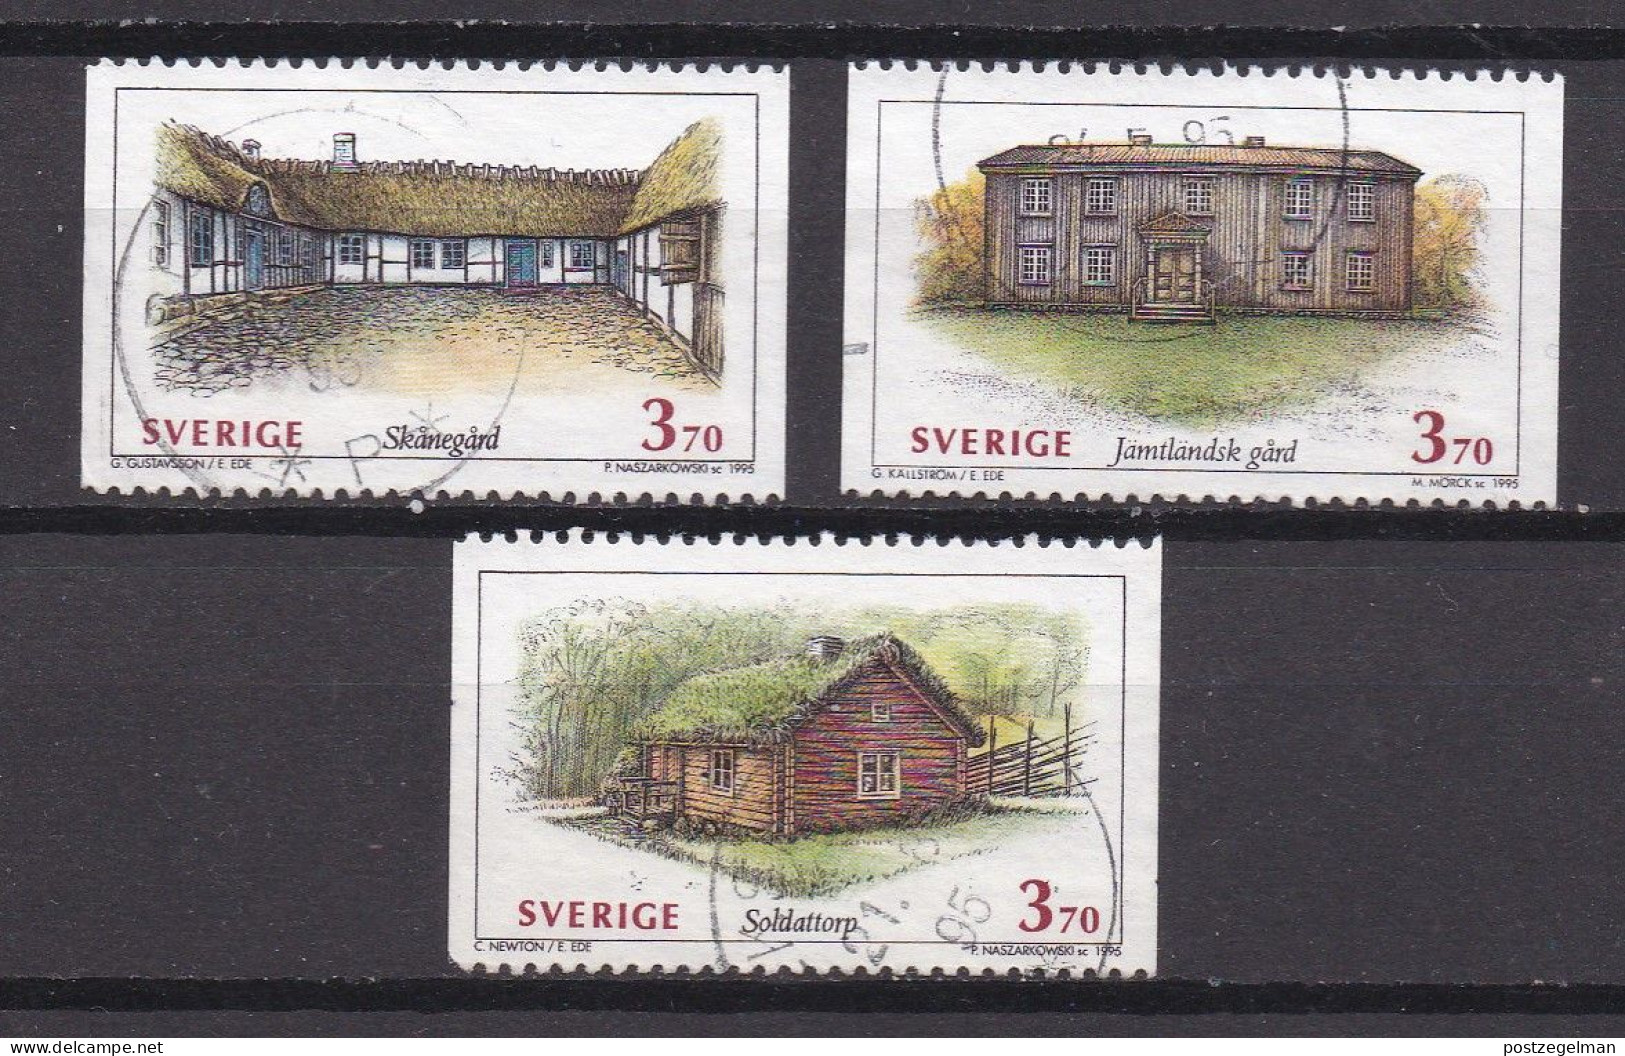 SWEDEN,1995, Used Stamp(s), Swedish Houses , SG1793=1797,  Scan 20331, 3 Values Only - Used Stamps